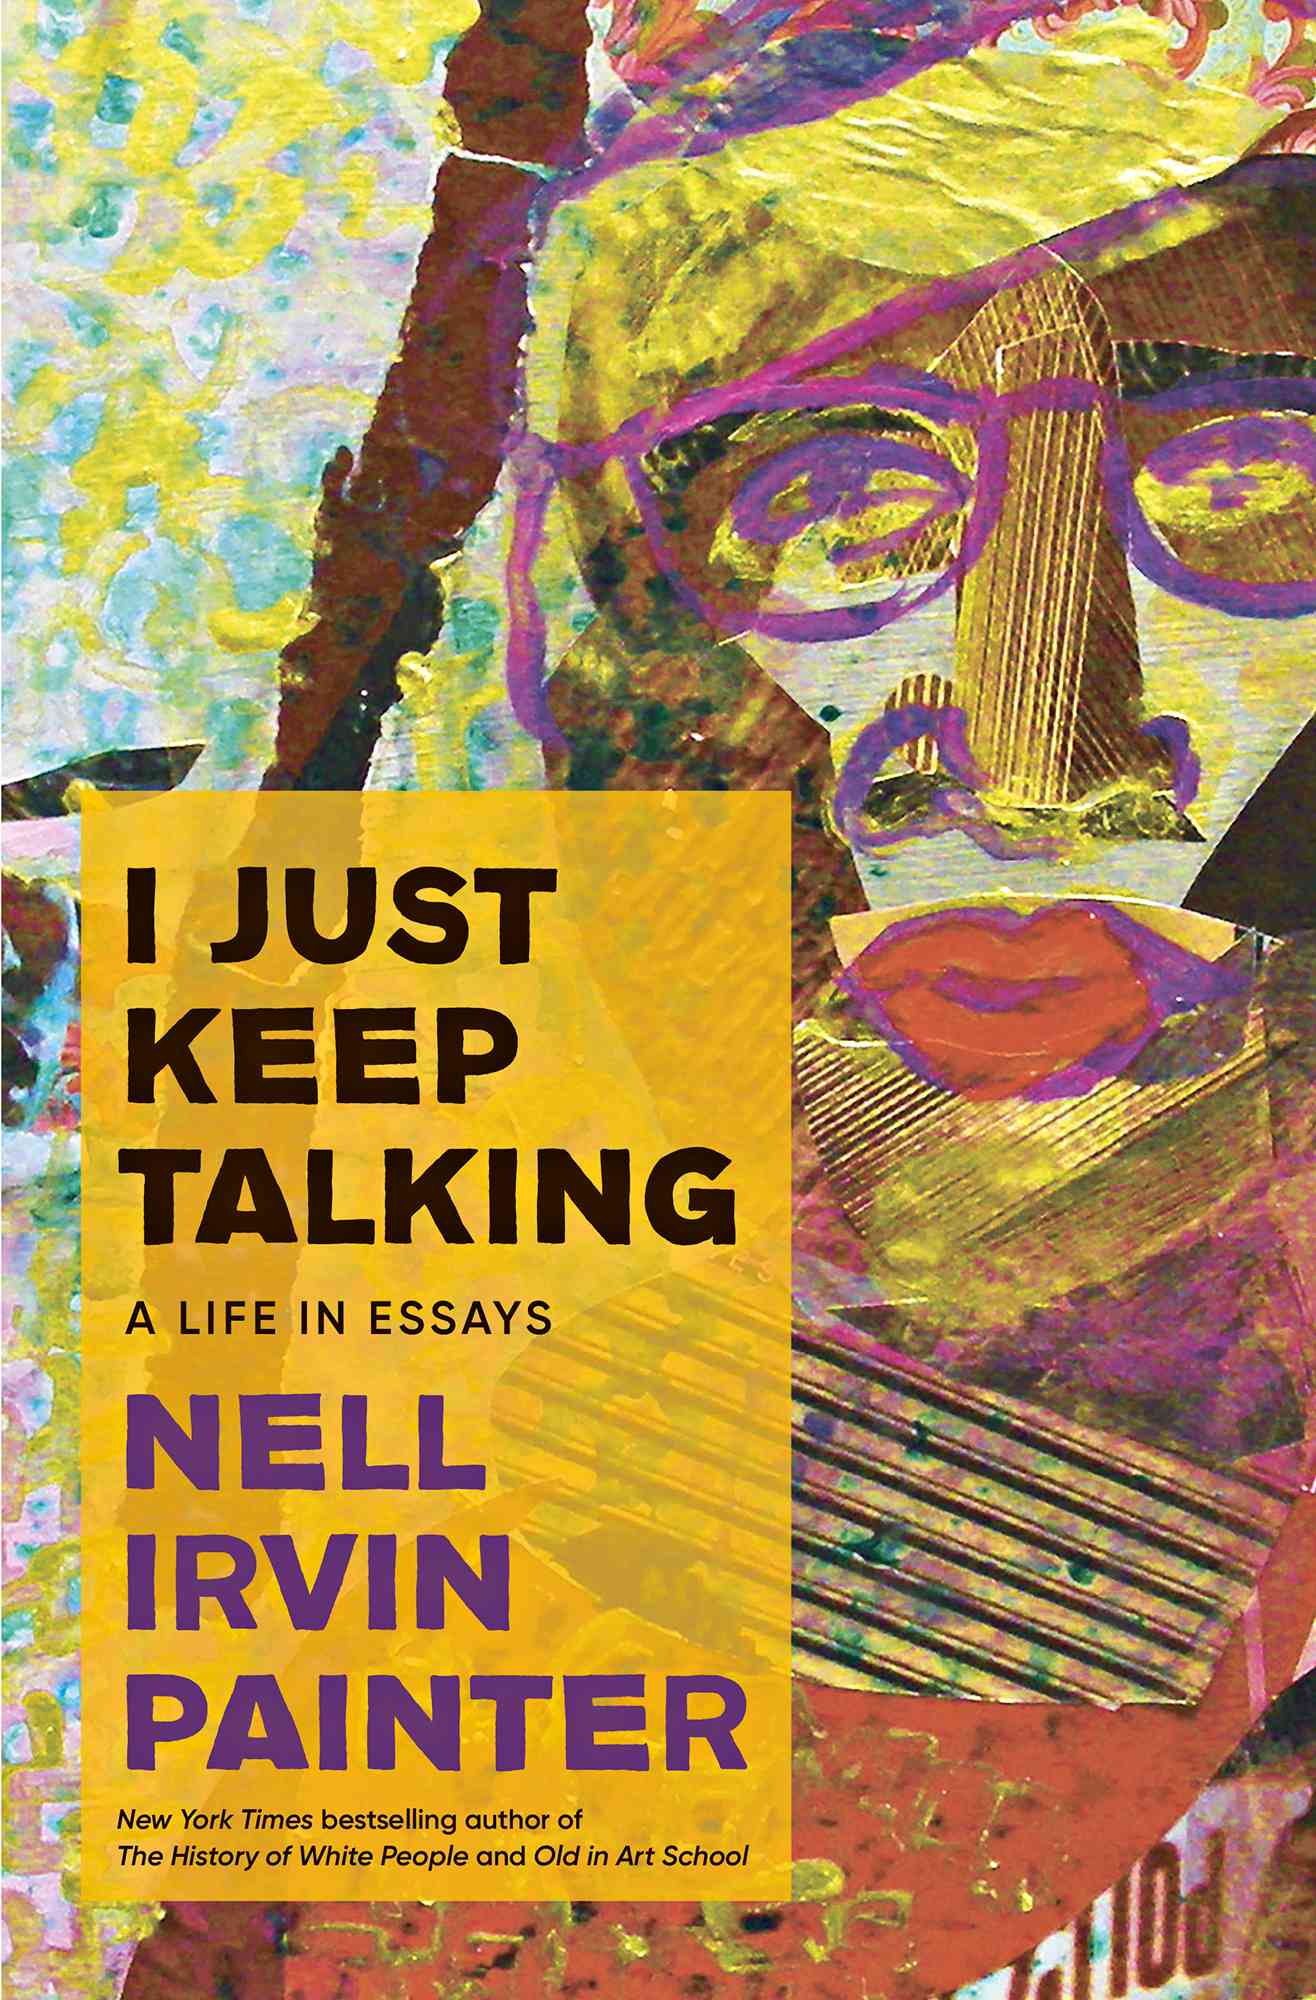 I Just Keep Talking: A Life in Essays by Nell Irvin Painter